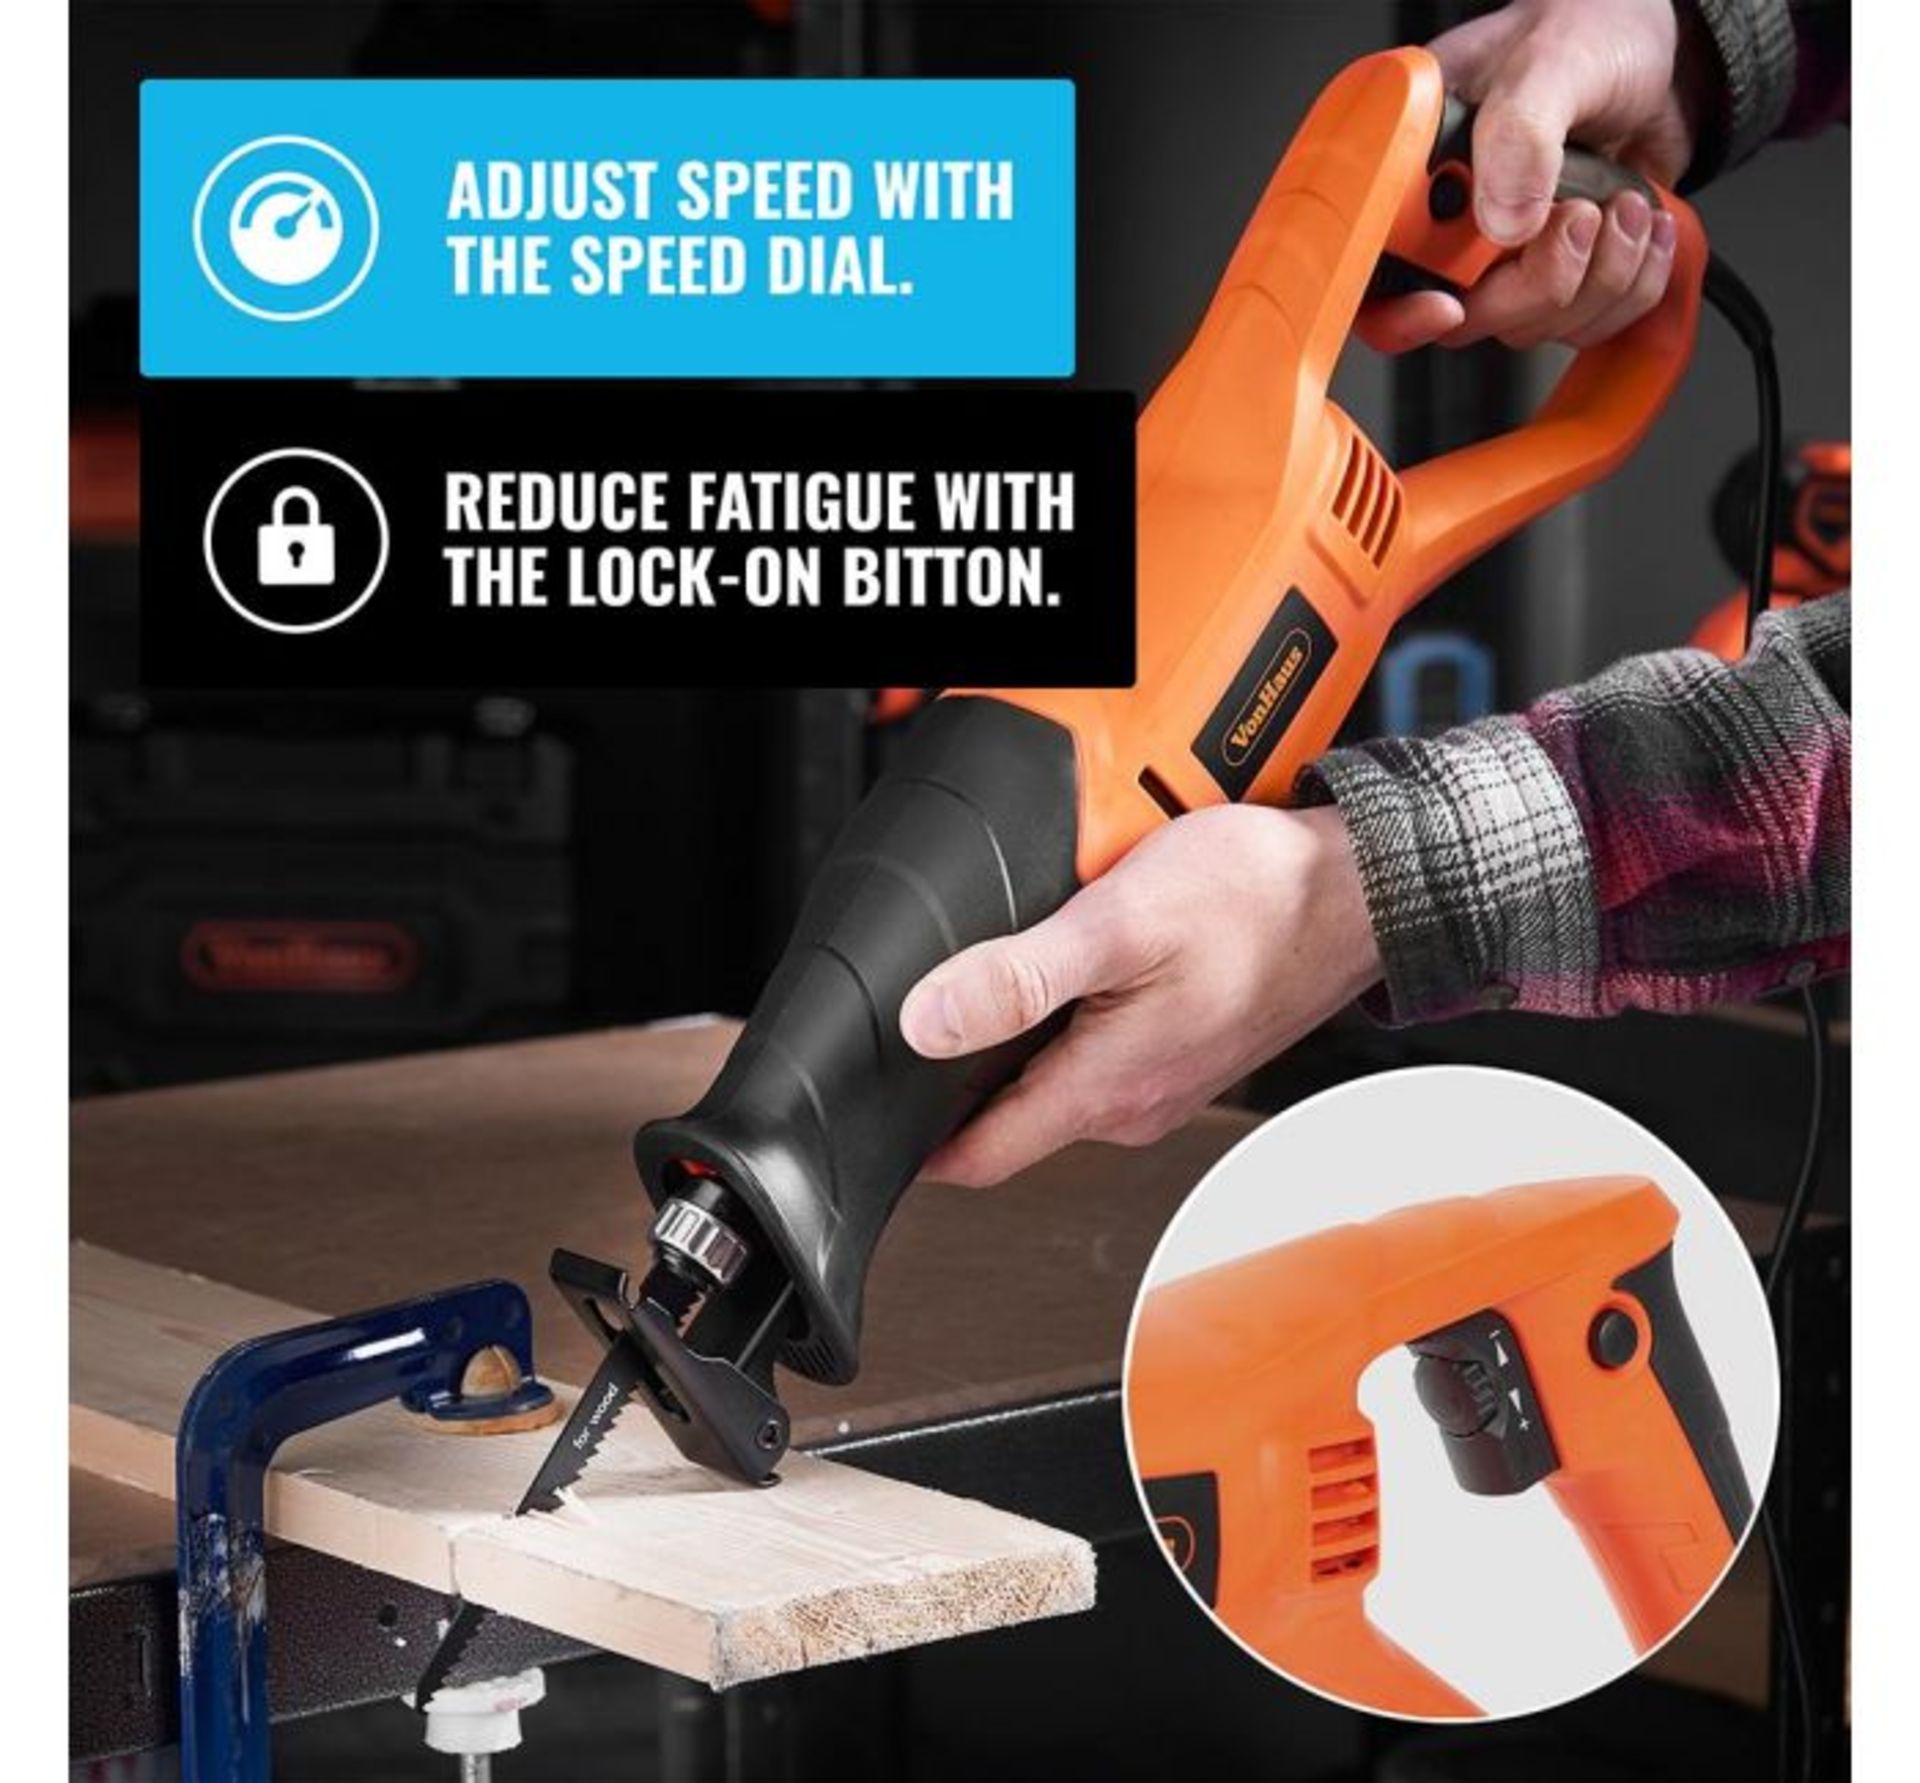 (F27) 800W Reciprocating Saw 800W motor effortlessly powers through wood up to 105mm thick and...